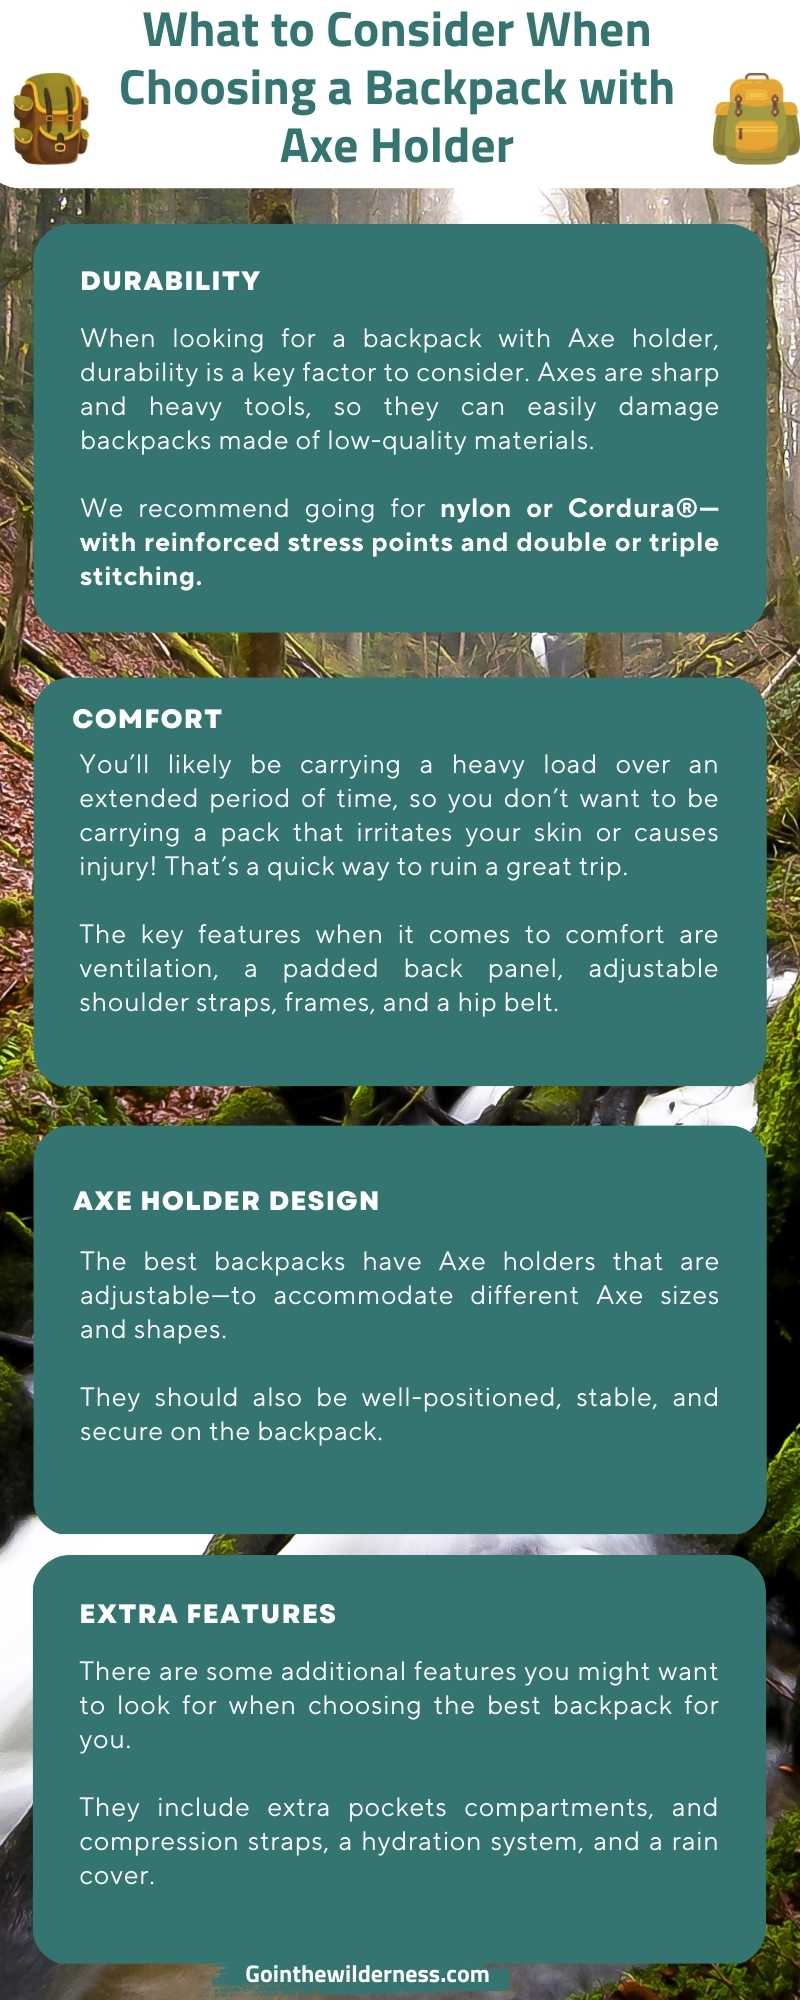 What to Consider When Choosing a Backpack with Axe Holder